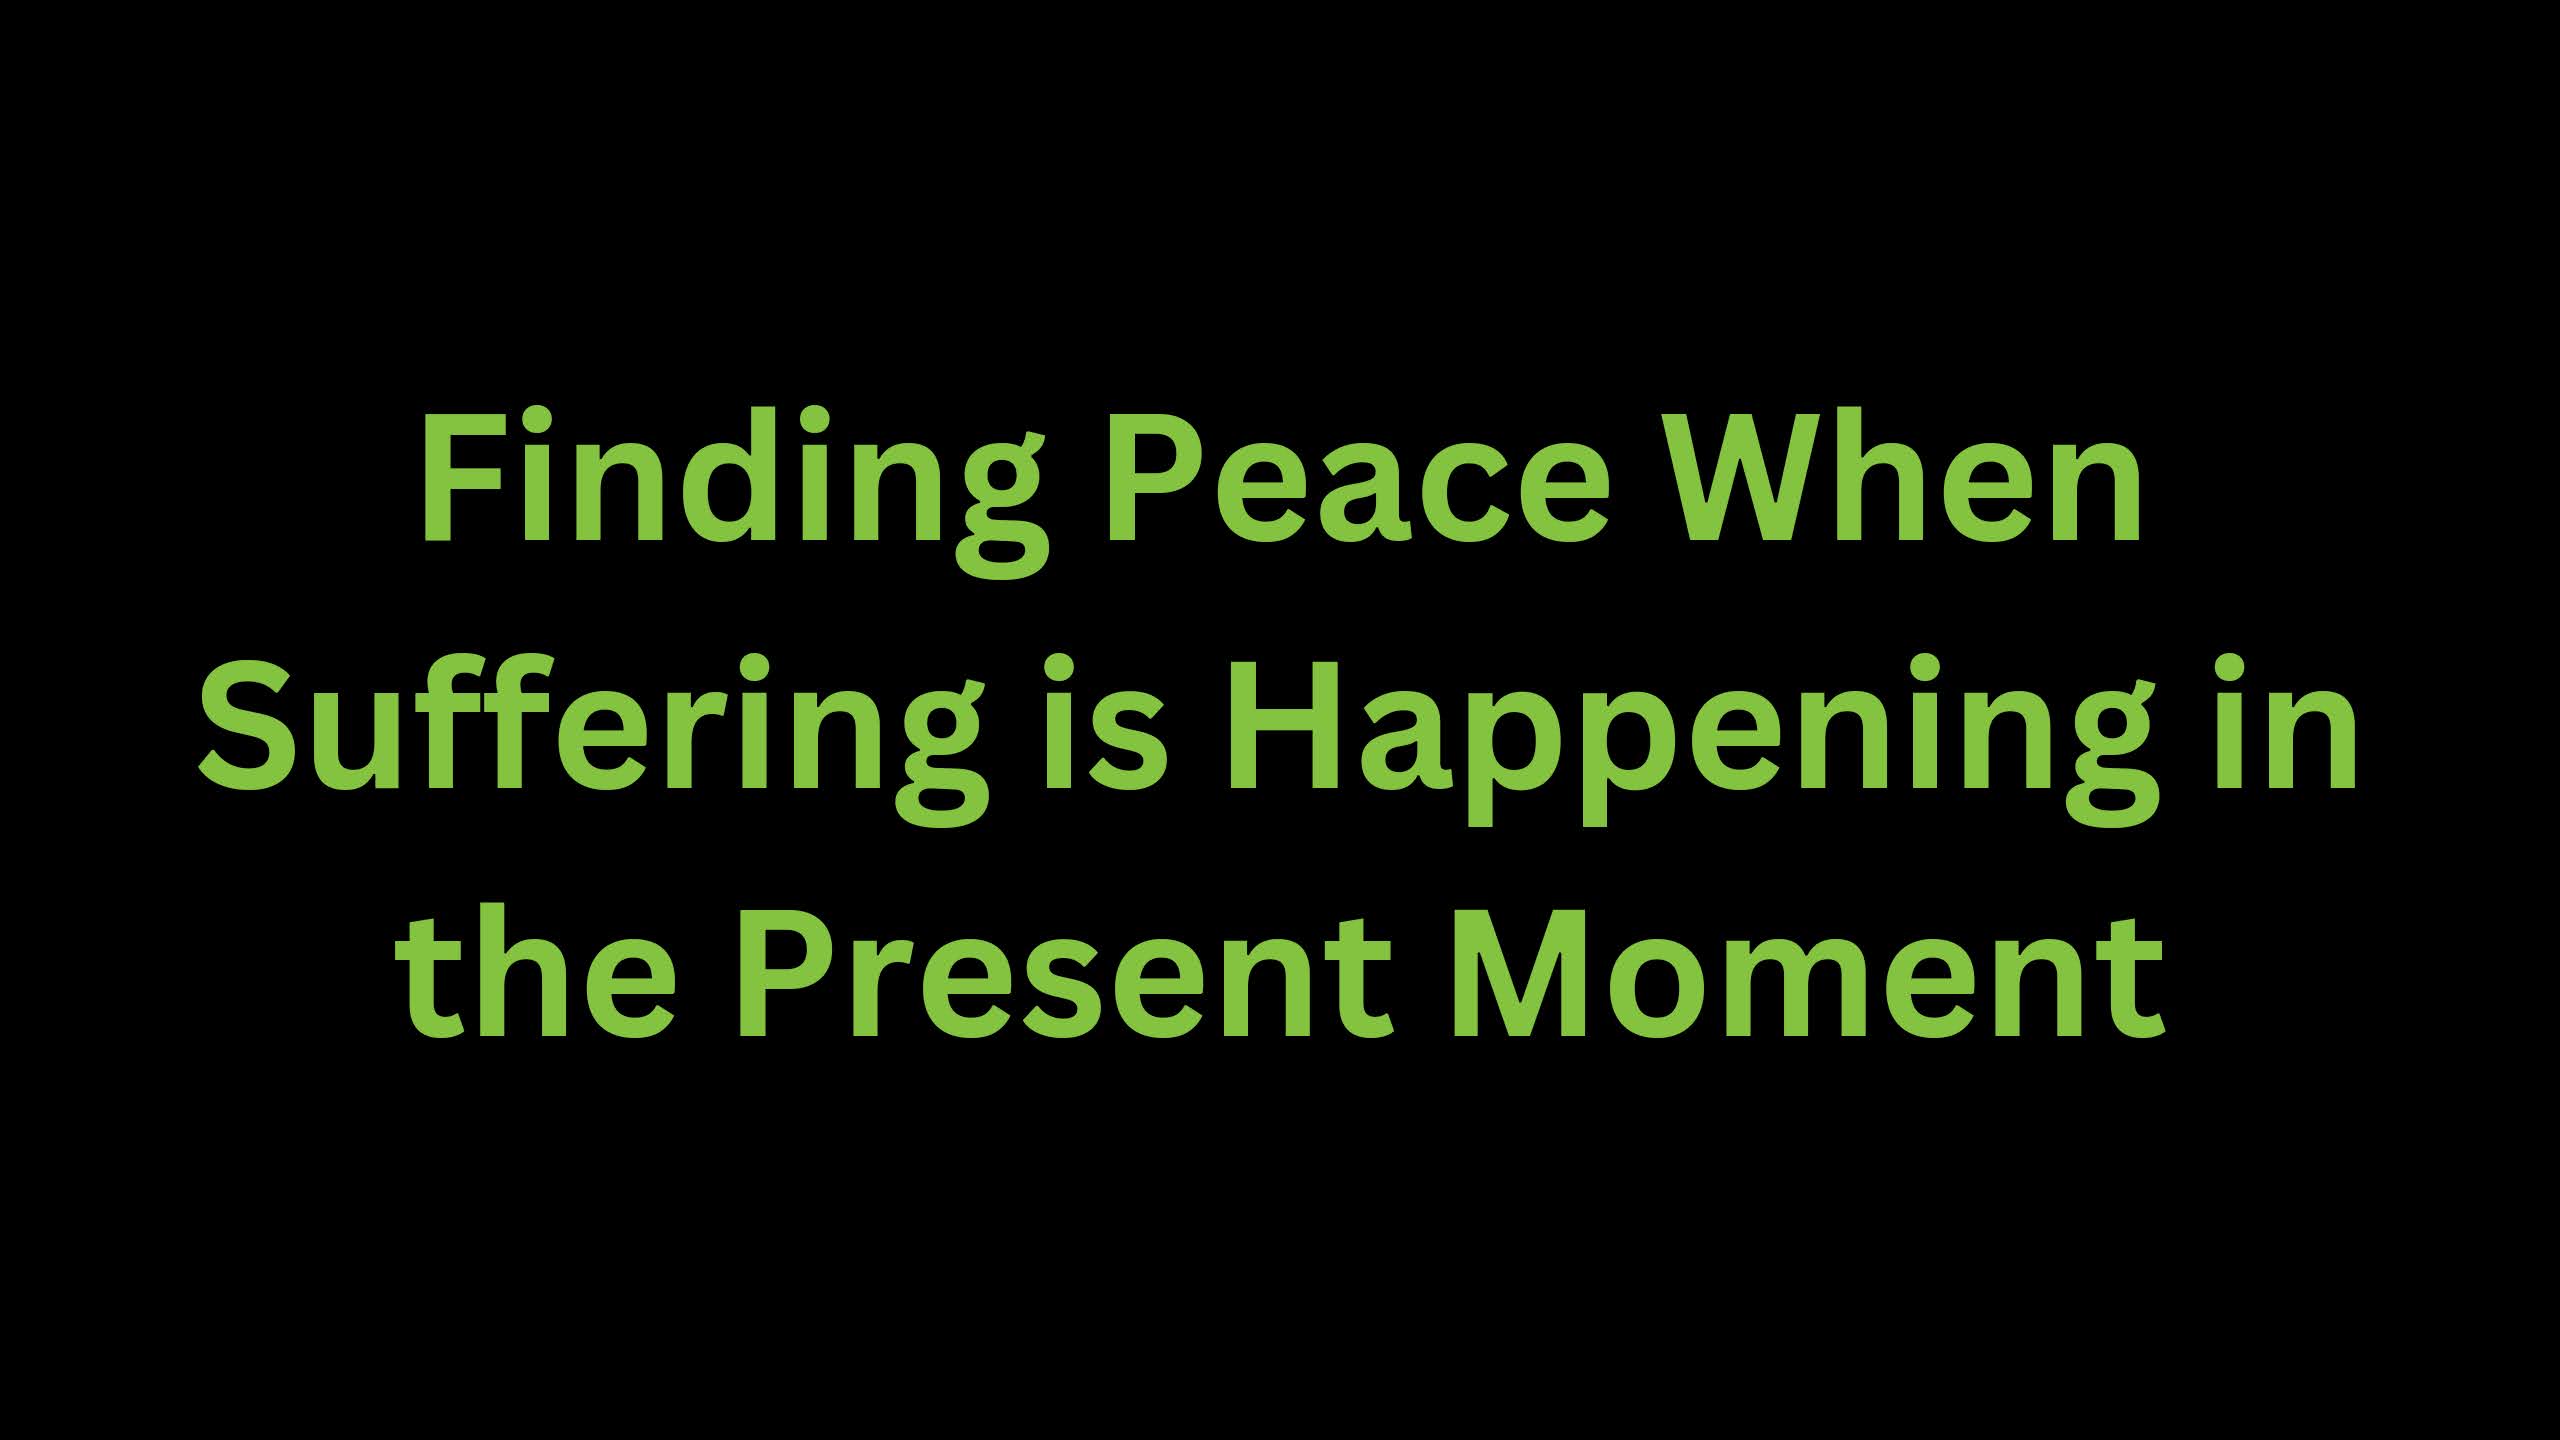 You are currently viewing Finding Peace When Suffering is Happening in the Present Moment